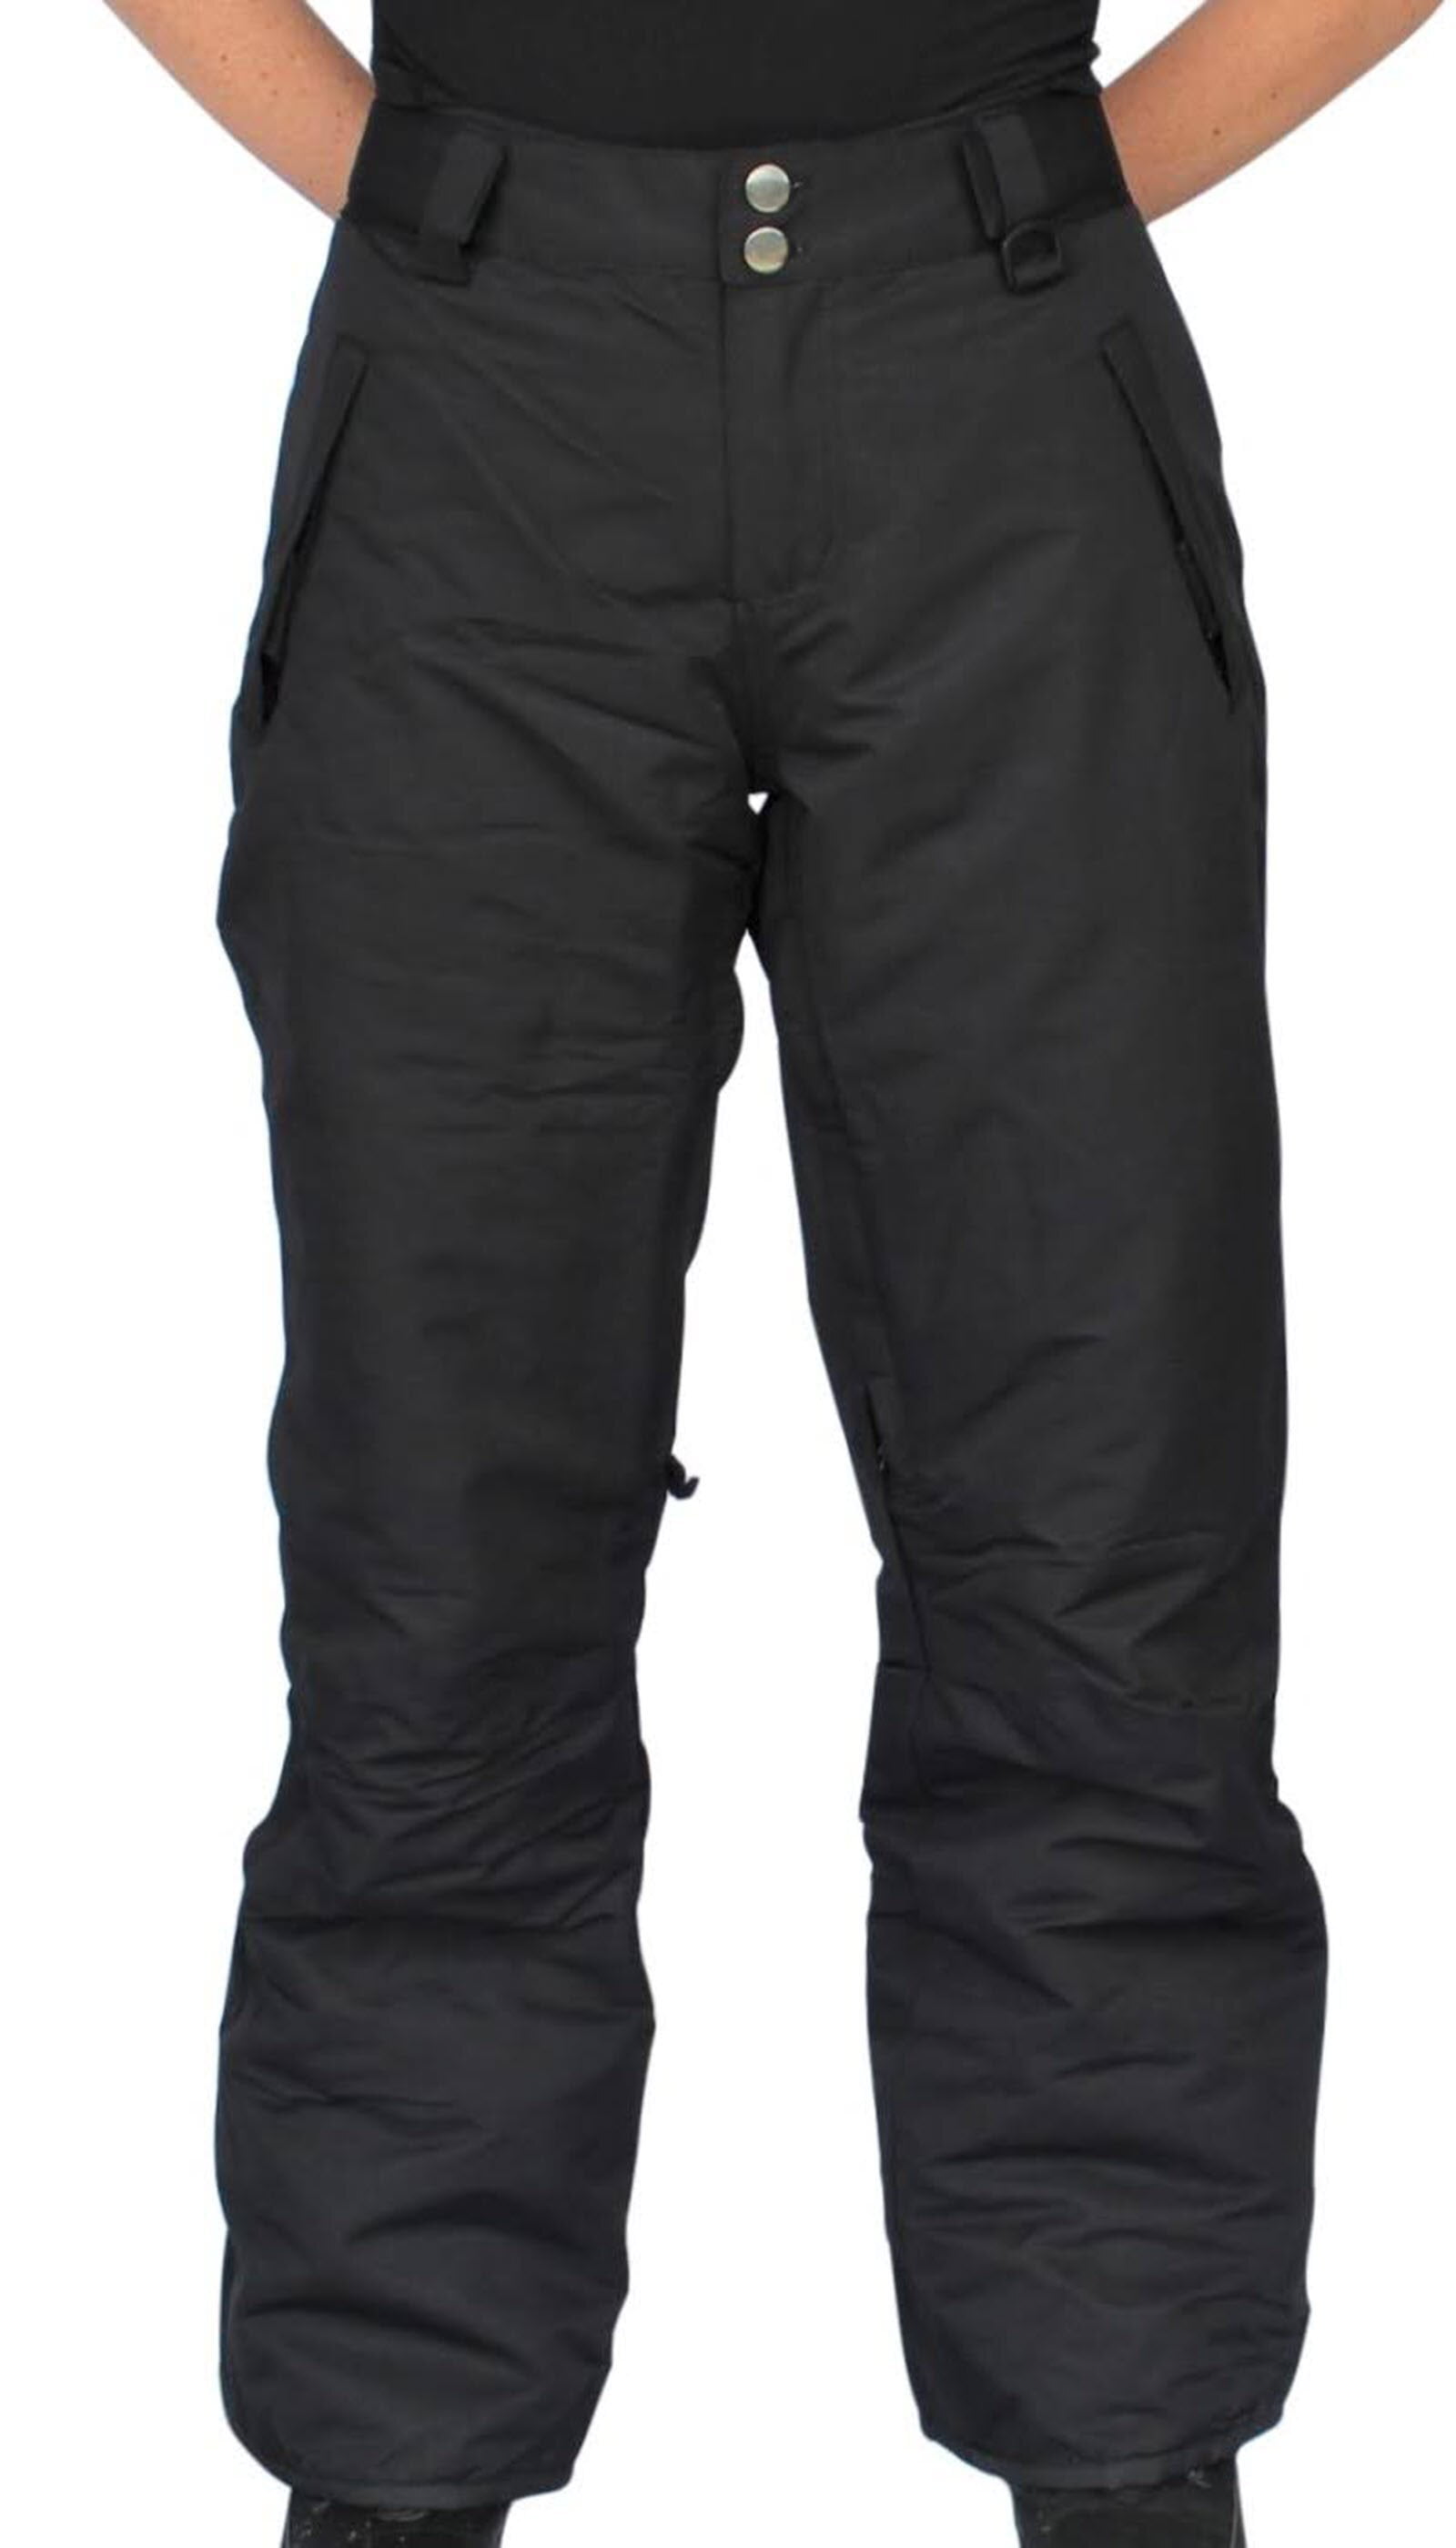 Winter's Edge Women's Avalanche Snow Pants – Adventure Outfitter